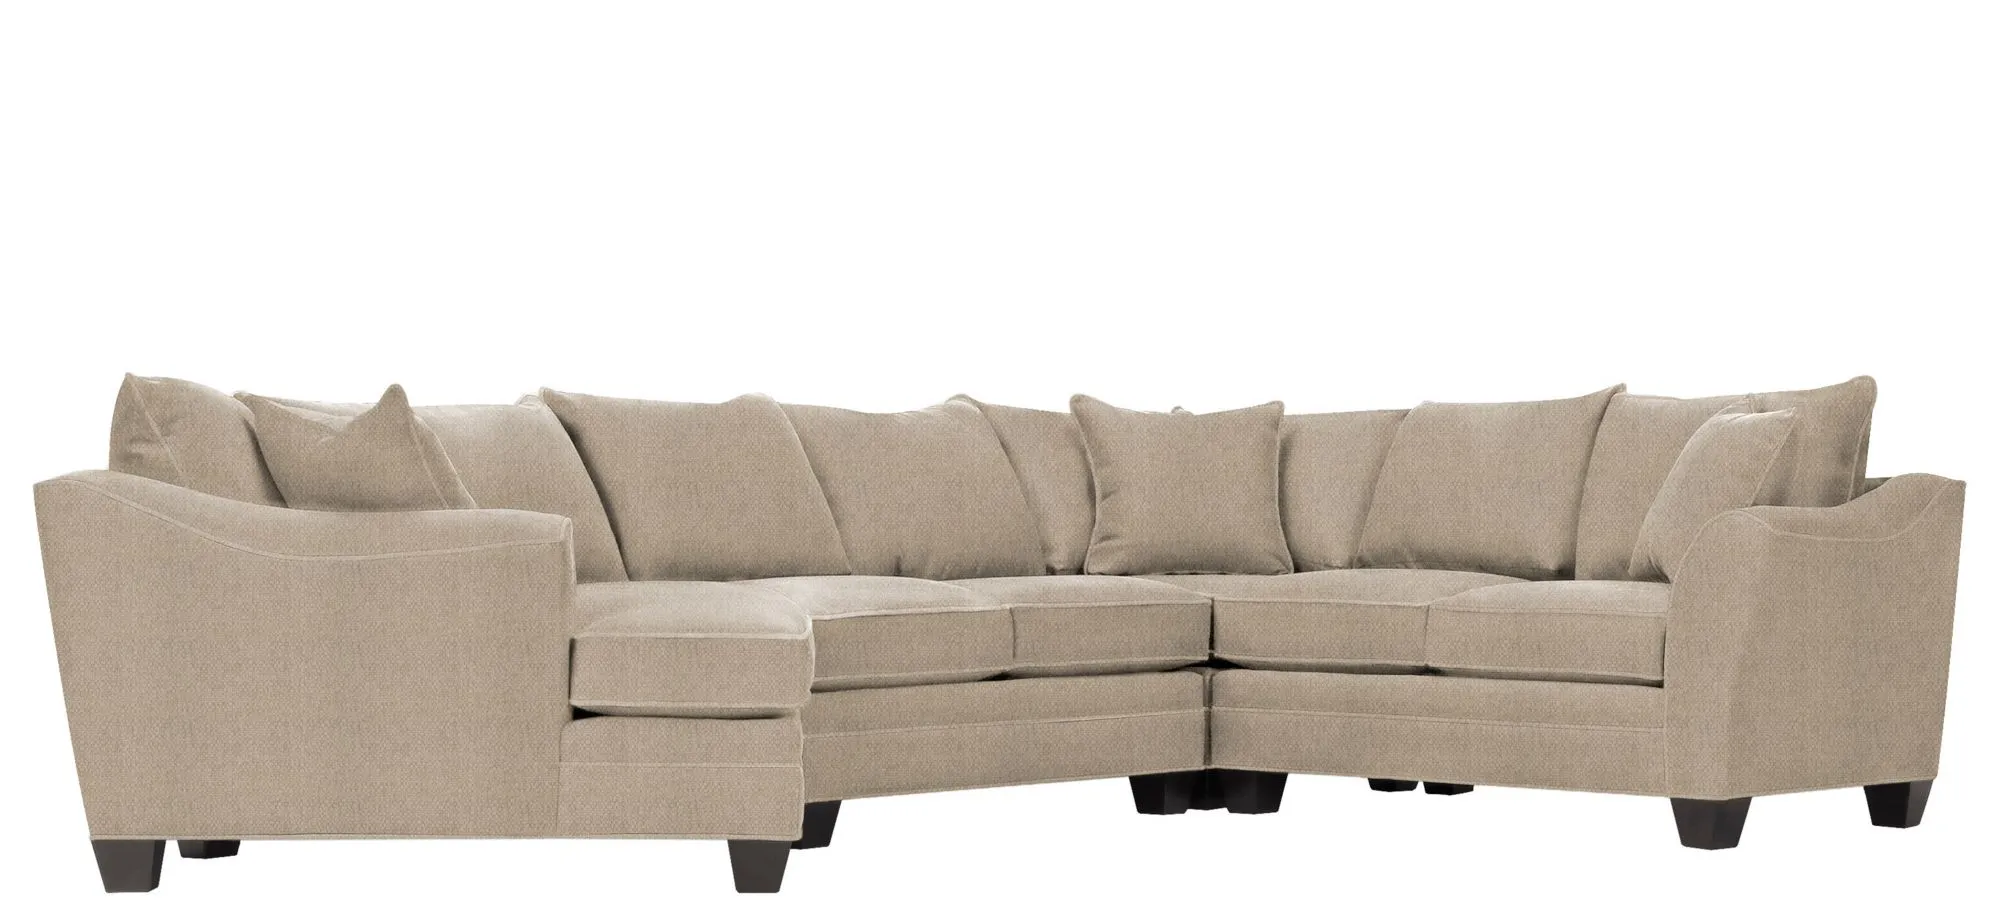 Foresthill 4-pc. Left Hand Cuddler with Loveseat Sectional Sofa in Sugar Shack Putty by H.M. Richards